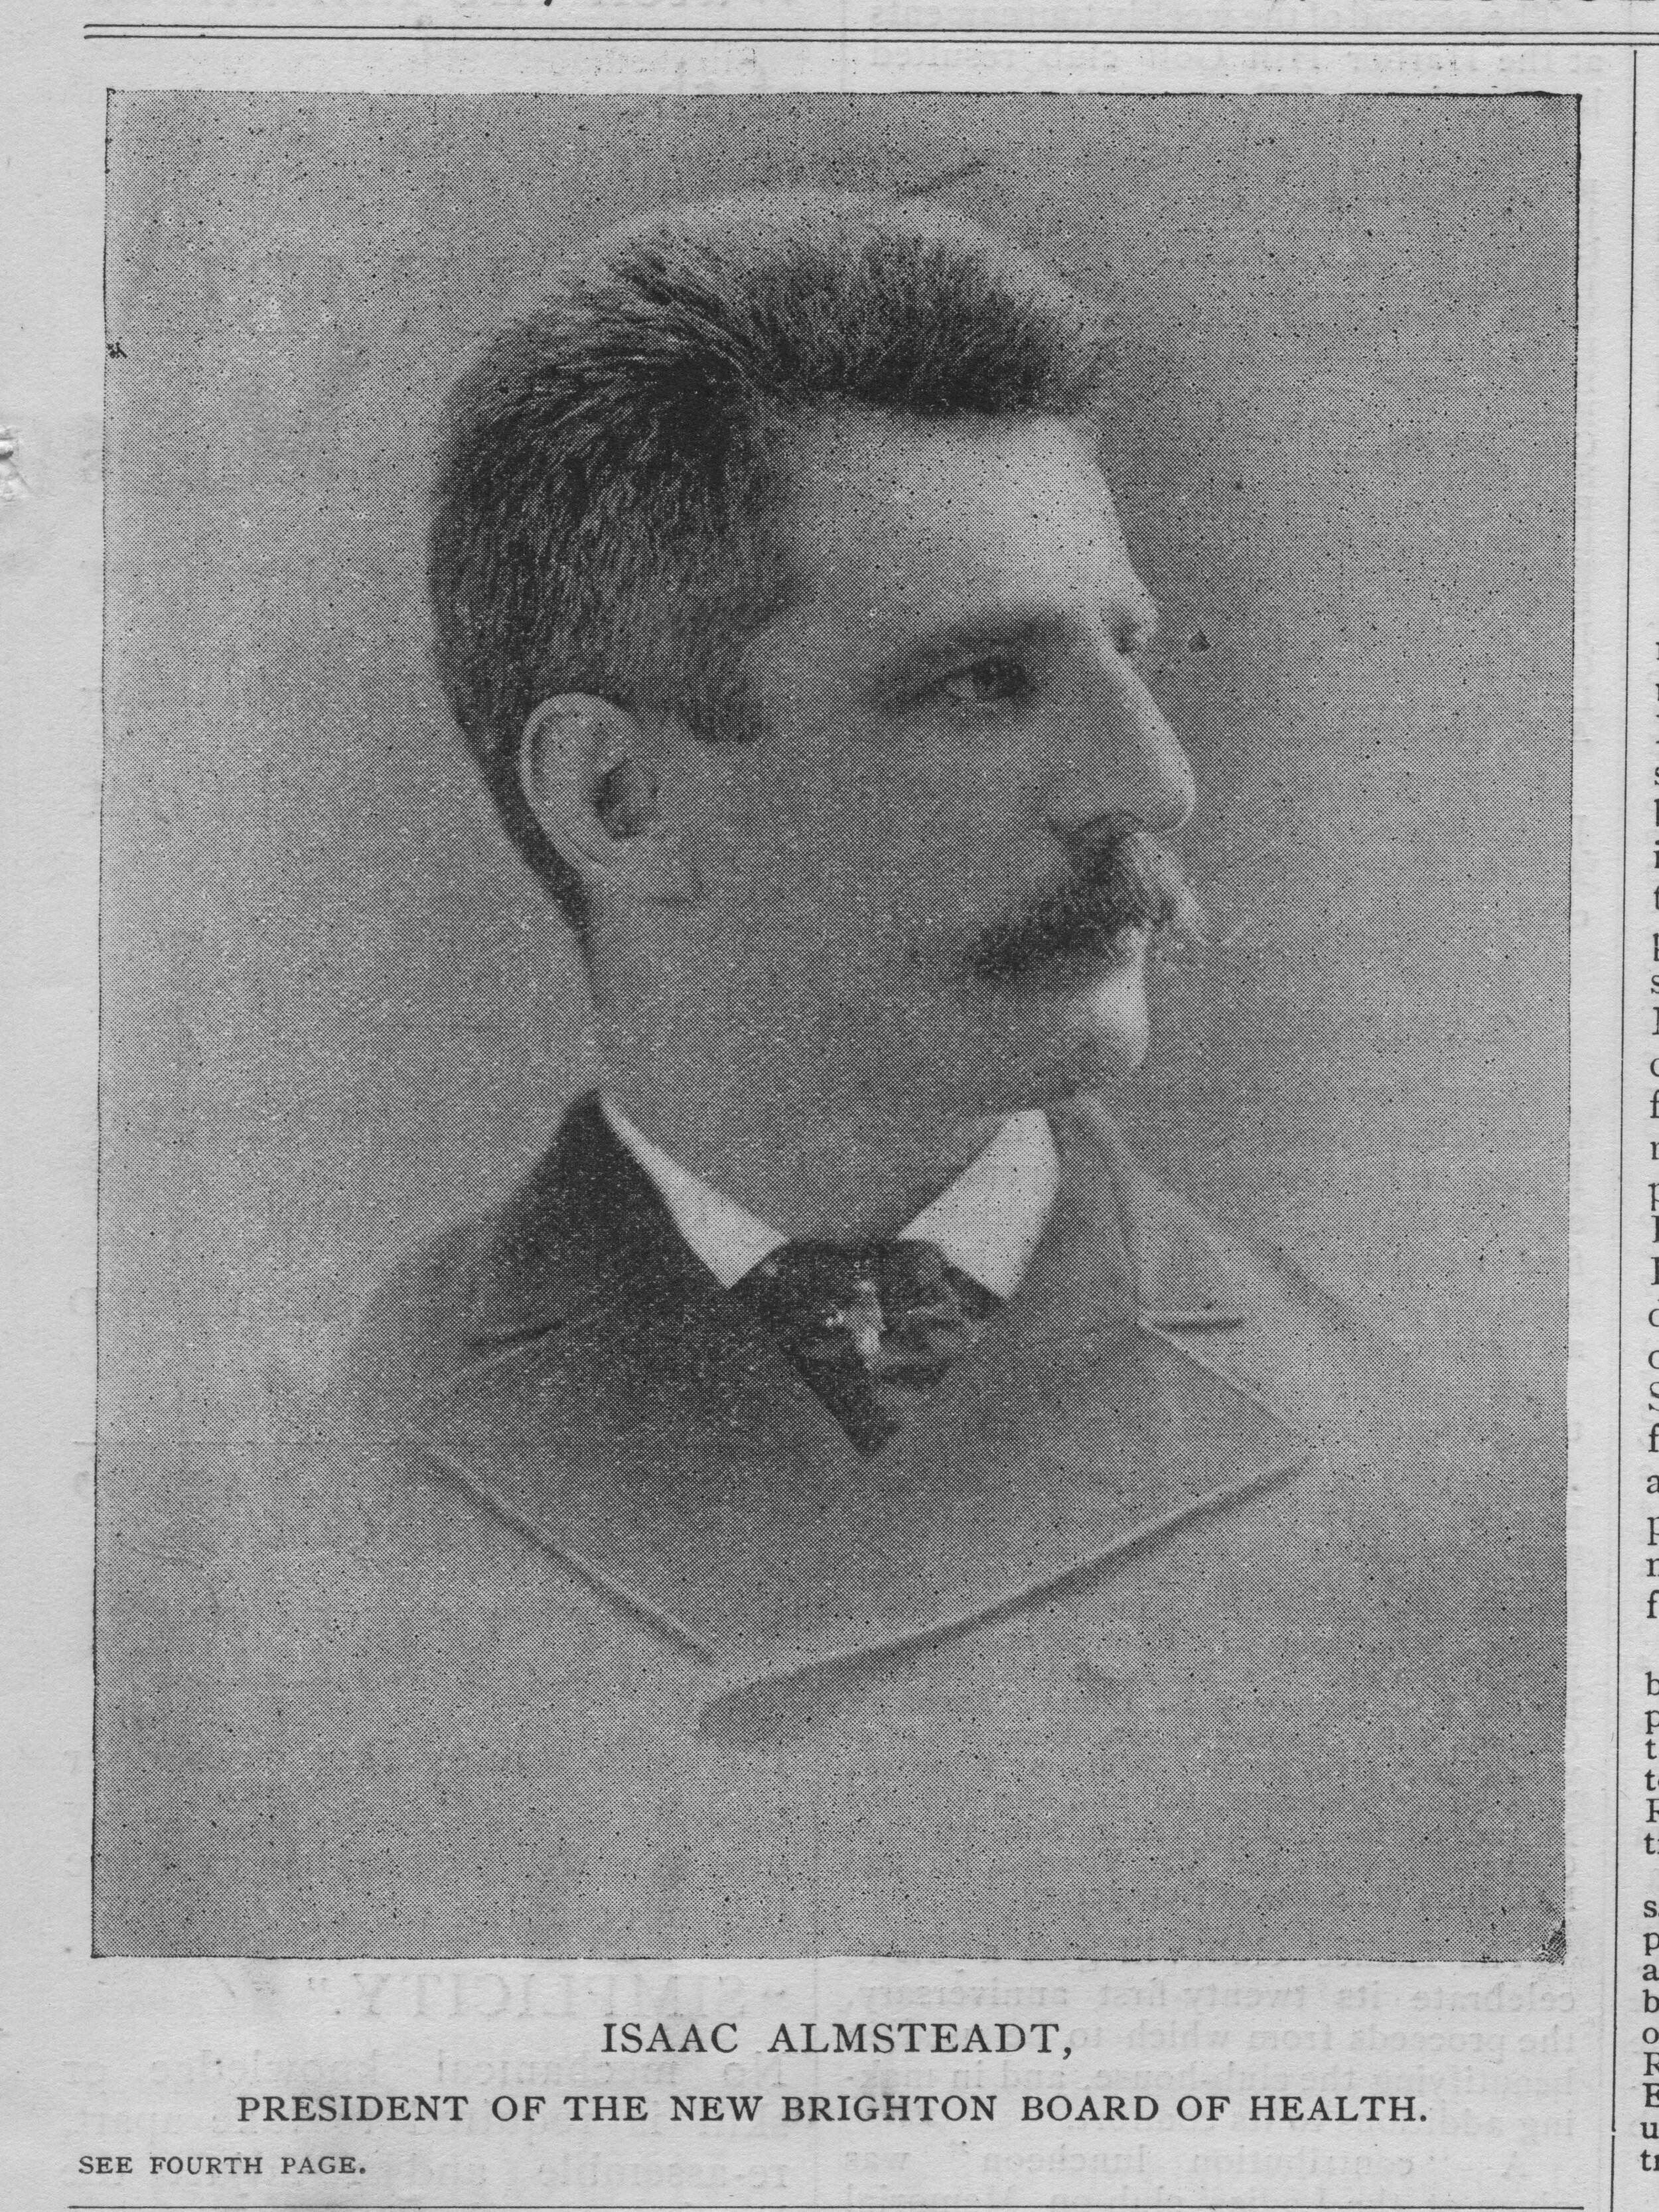 Portrait of Isaac Almstaedt, published in The News Letter (St. George, Staten Island), June 5, 1897.